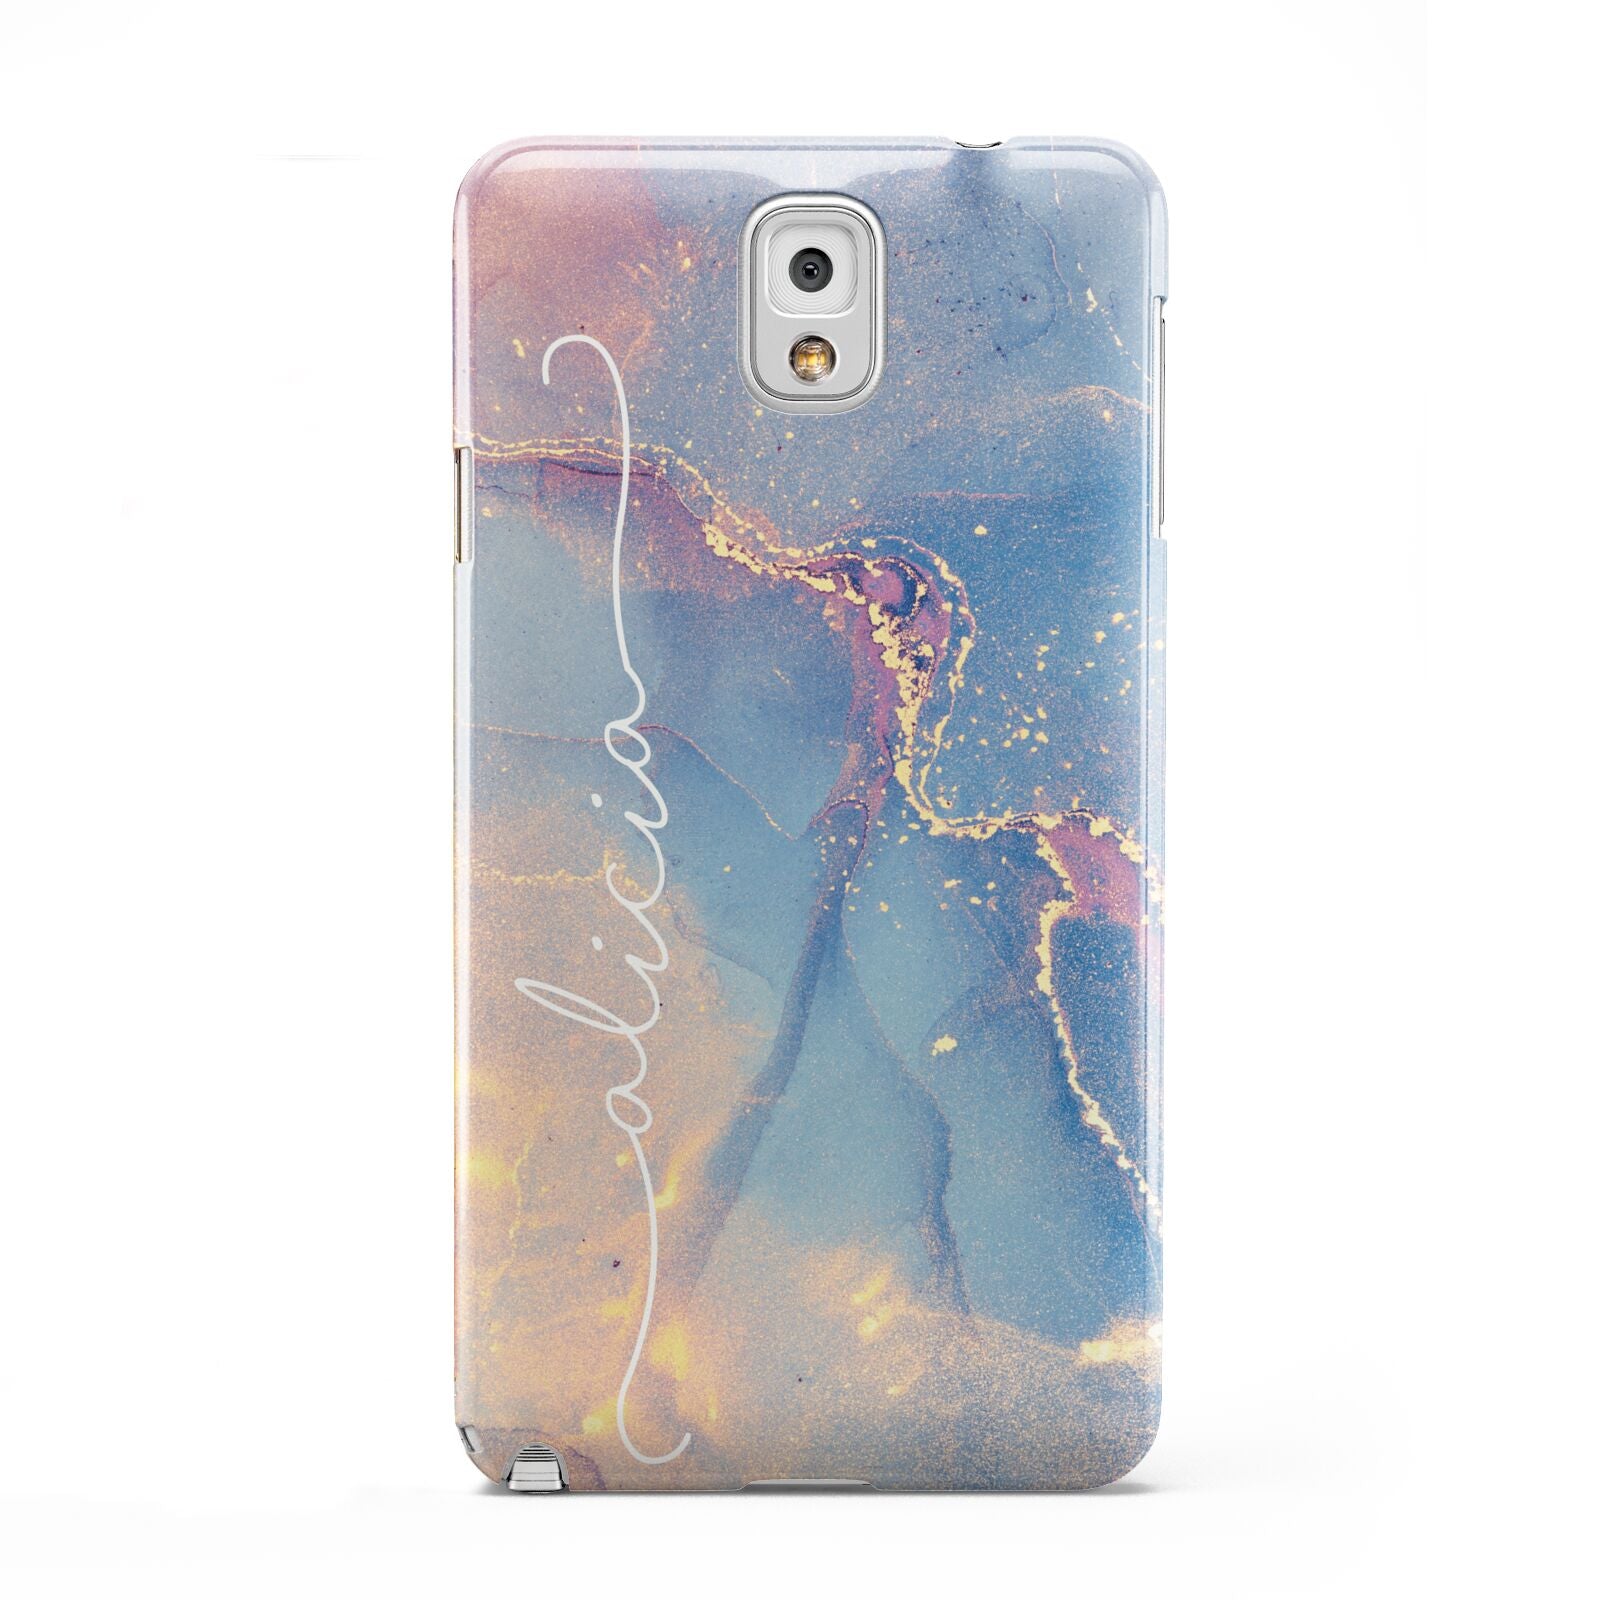 Blue and Pink Marble Samsung Galaxy Note 3 Case